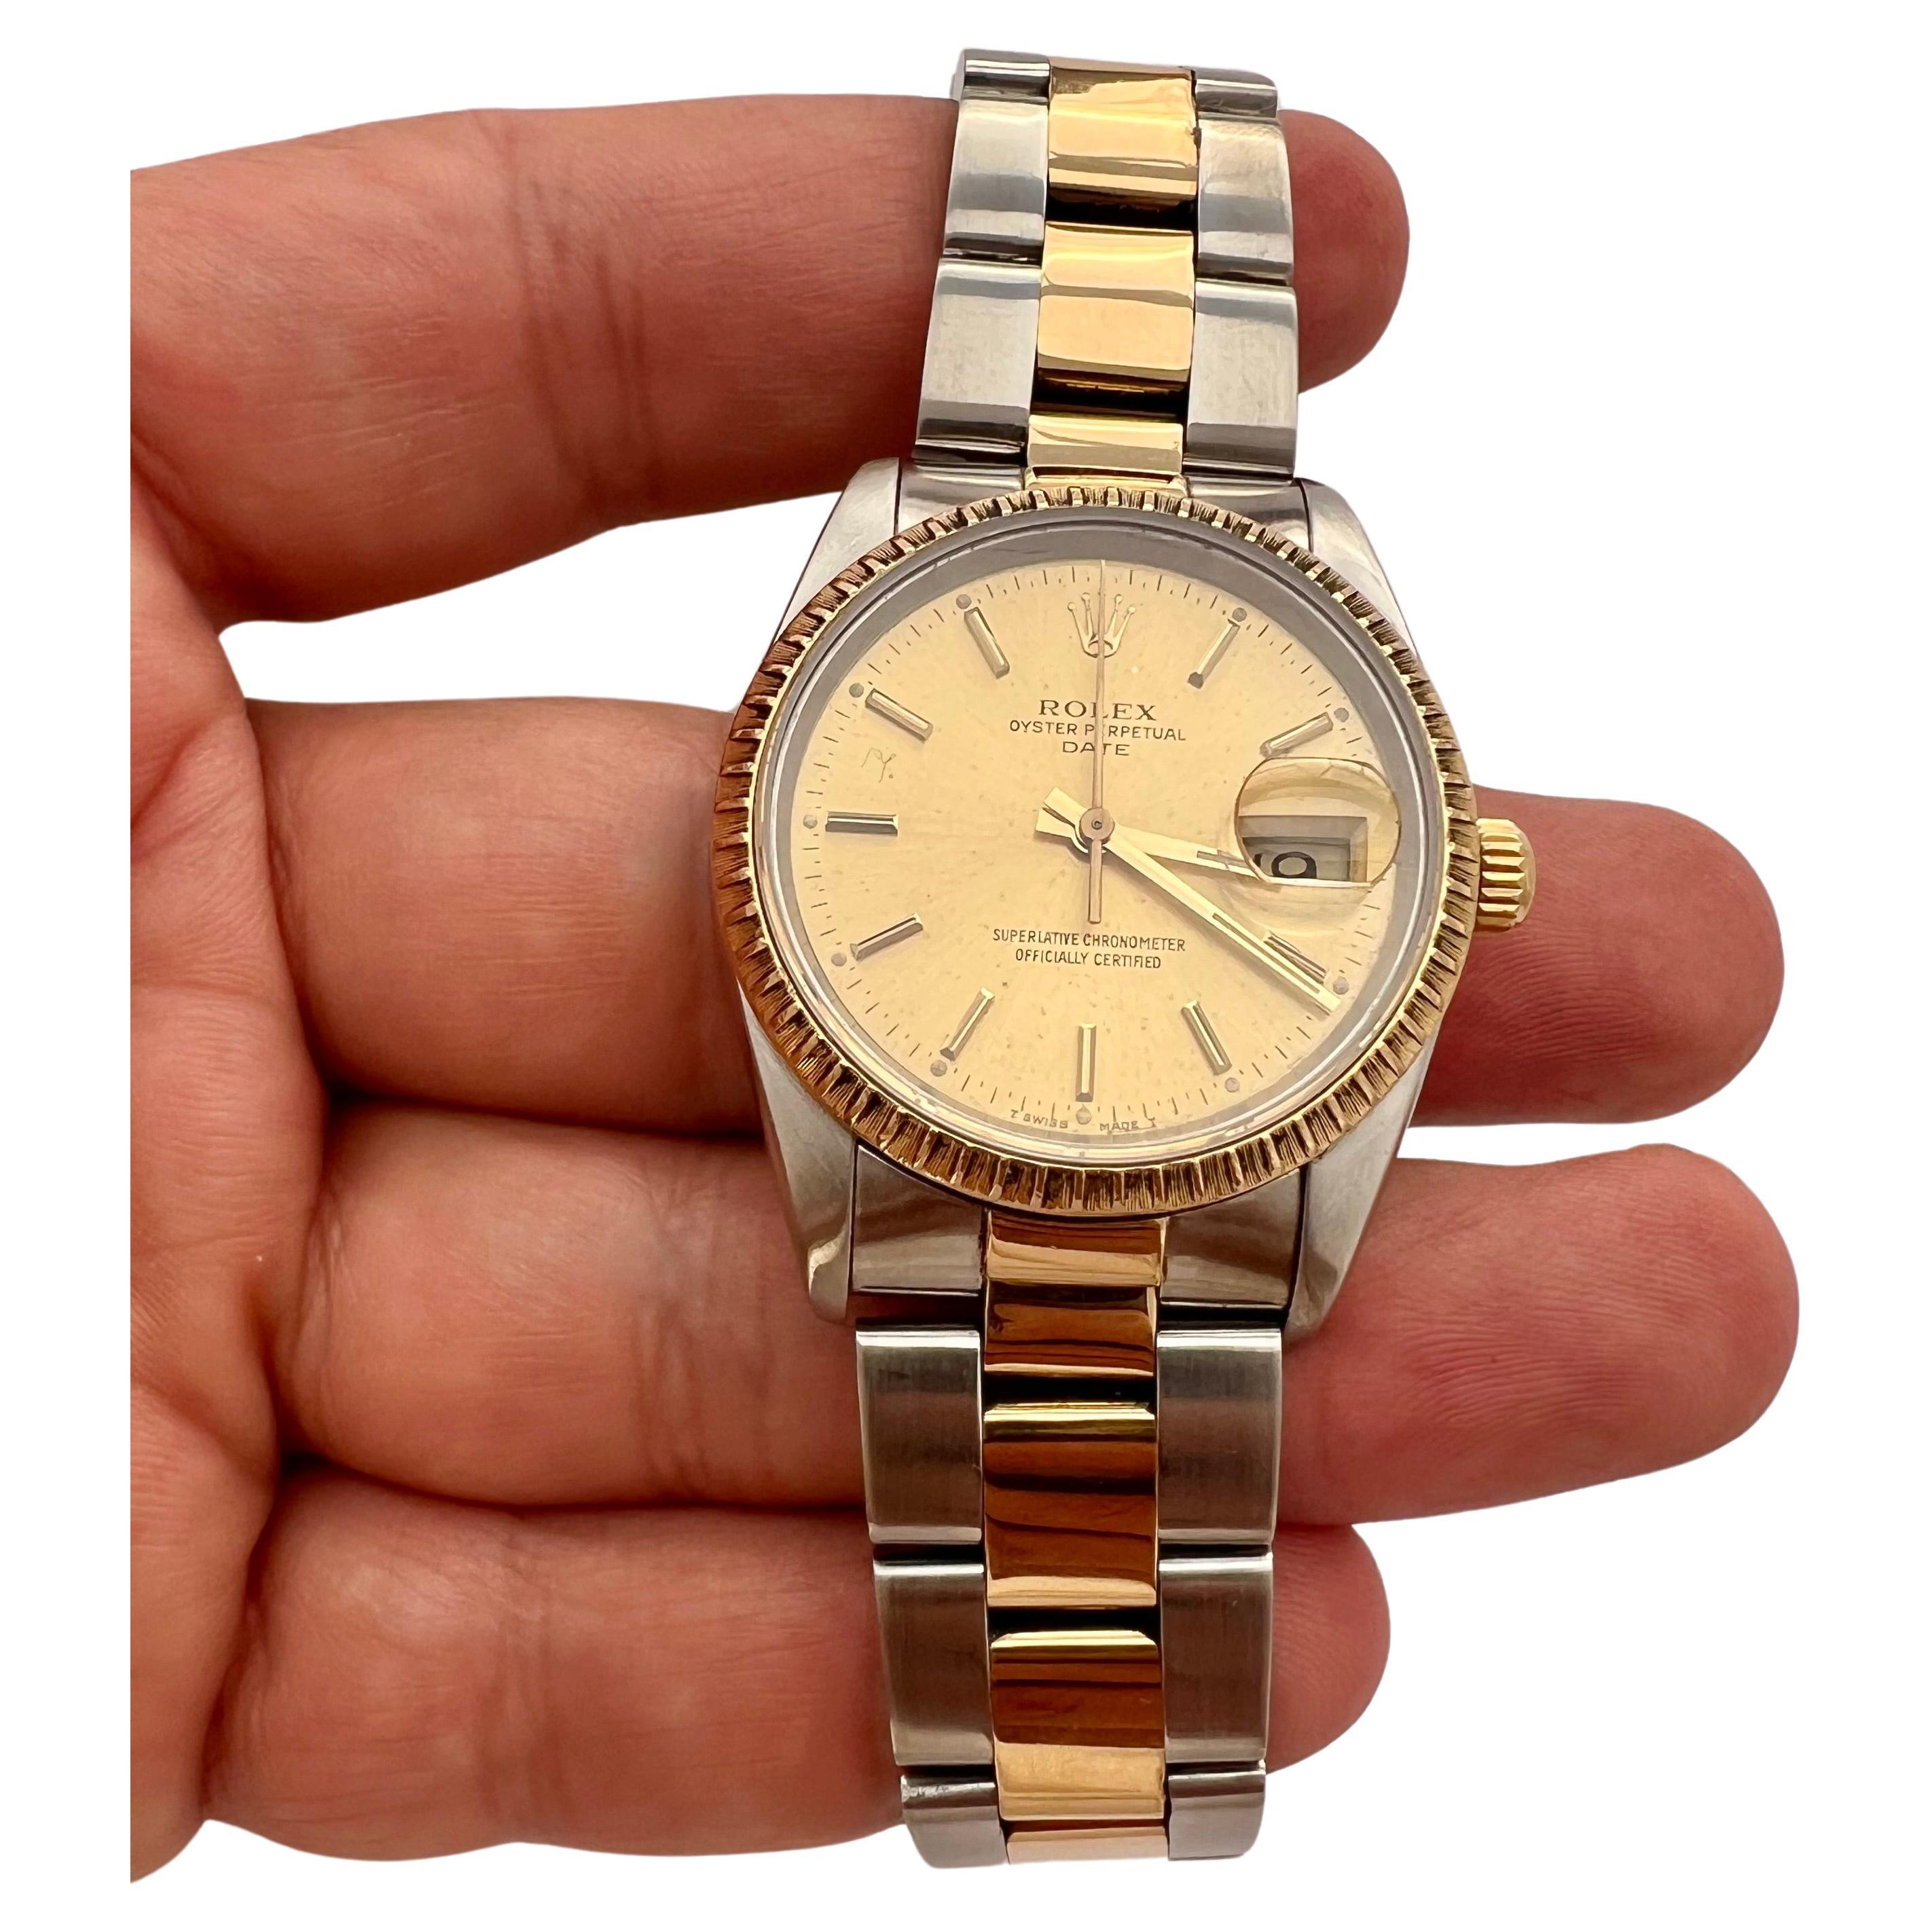 How do I wind a Rolex Datejust?